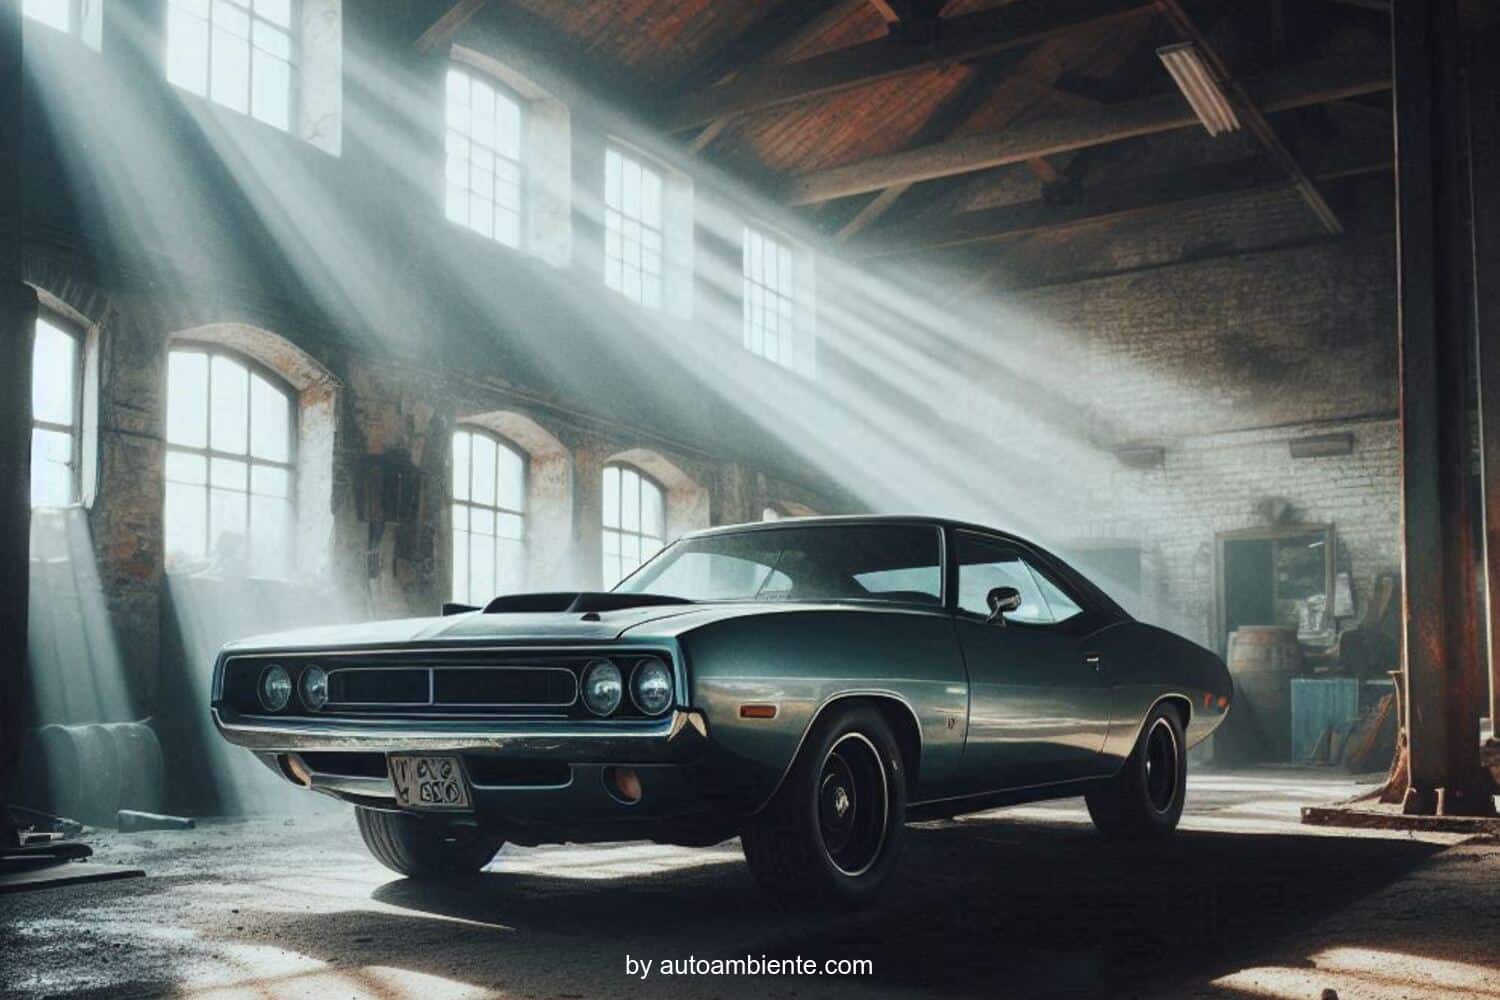 The Rarest Muscle Cars Ever Made – Do You Have One of These Hidden Gems by autoambiente in autoambiente.com